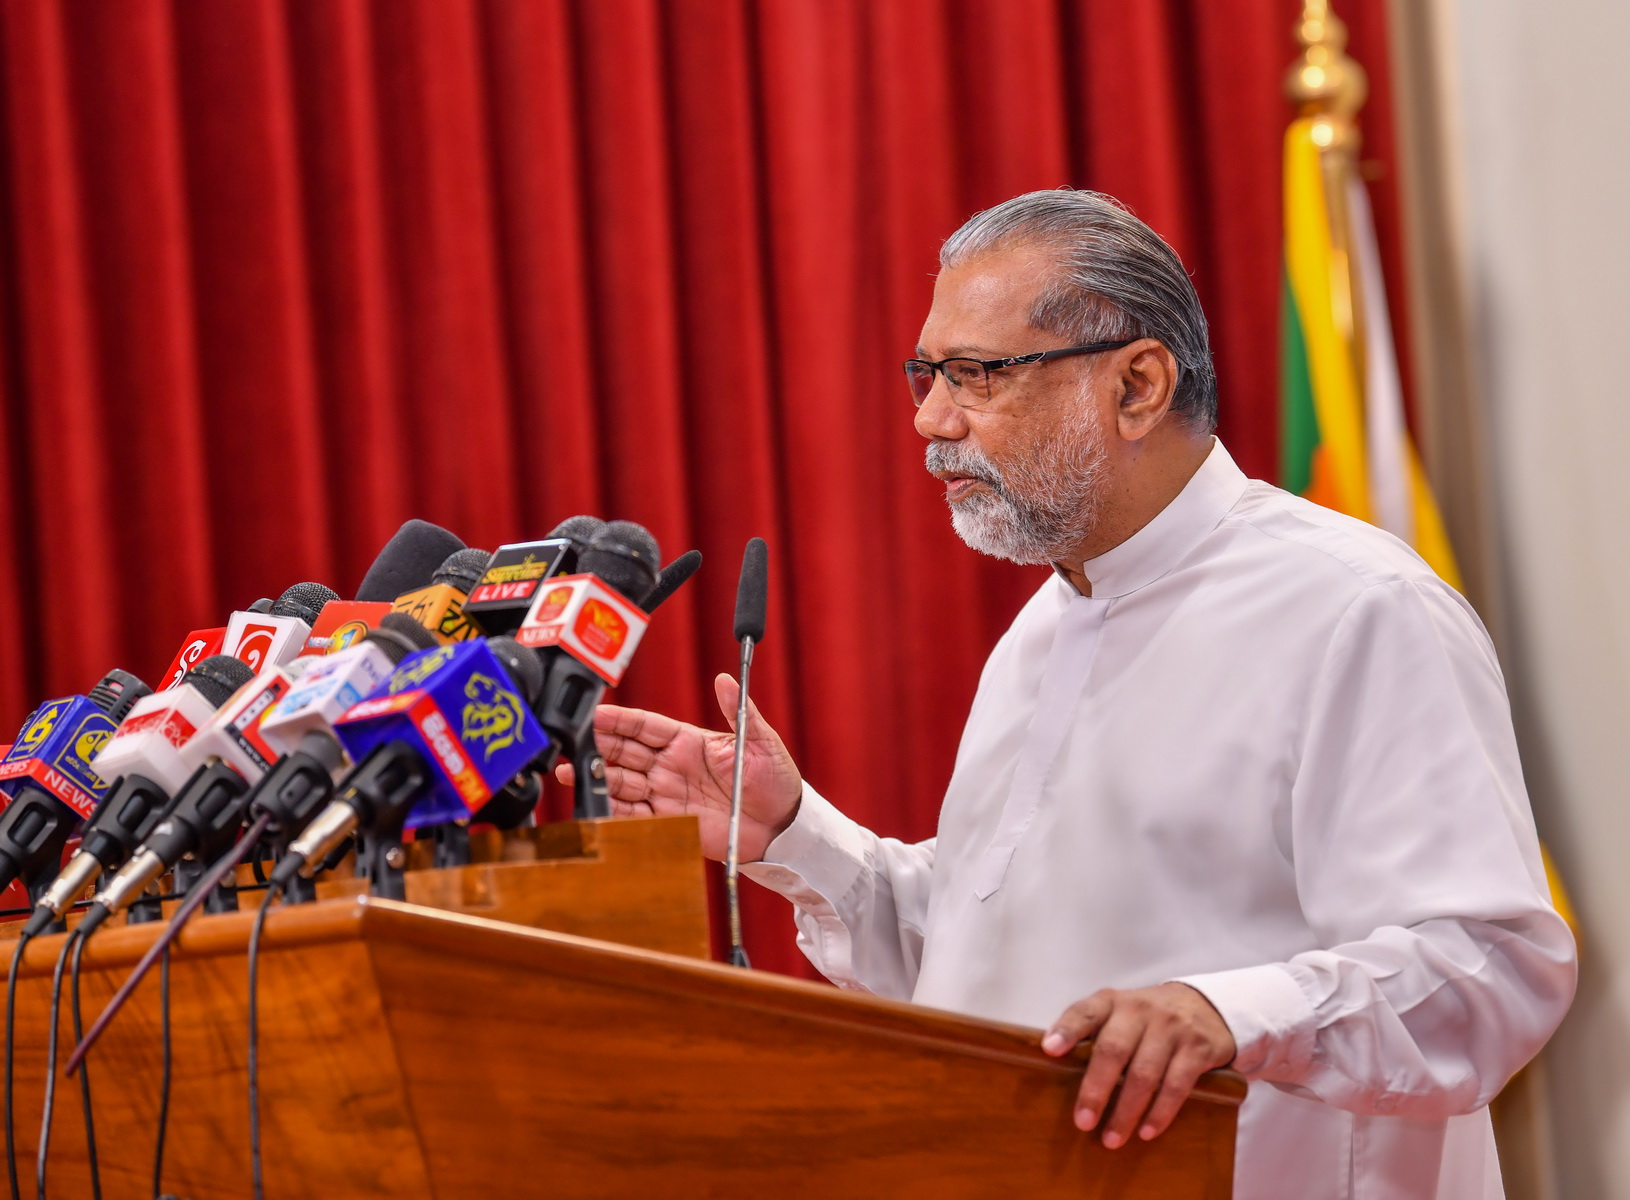 New laws will be enacted to prohibit all actions that threaten religious harmony – Minister of Buddhasasana, Religious and Cultural Affairs Vidura Wickramanayaka